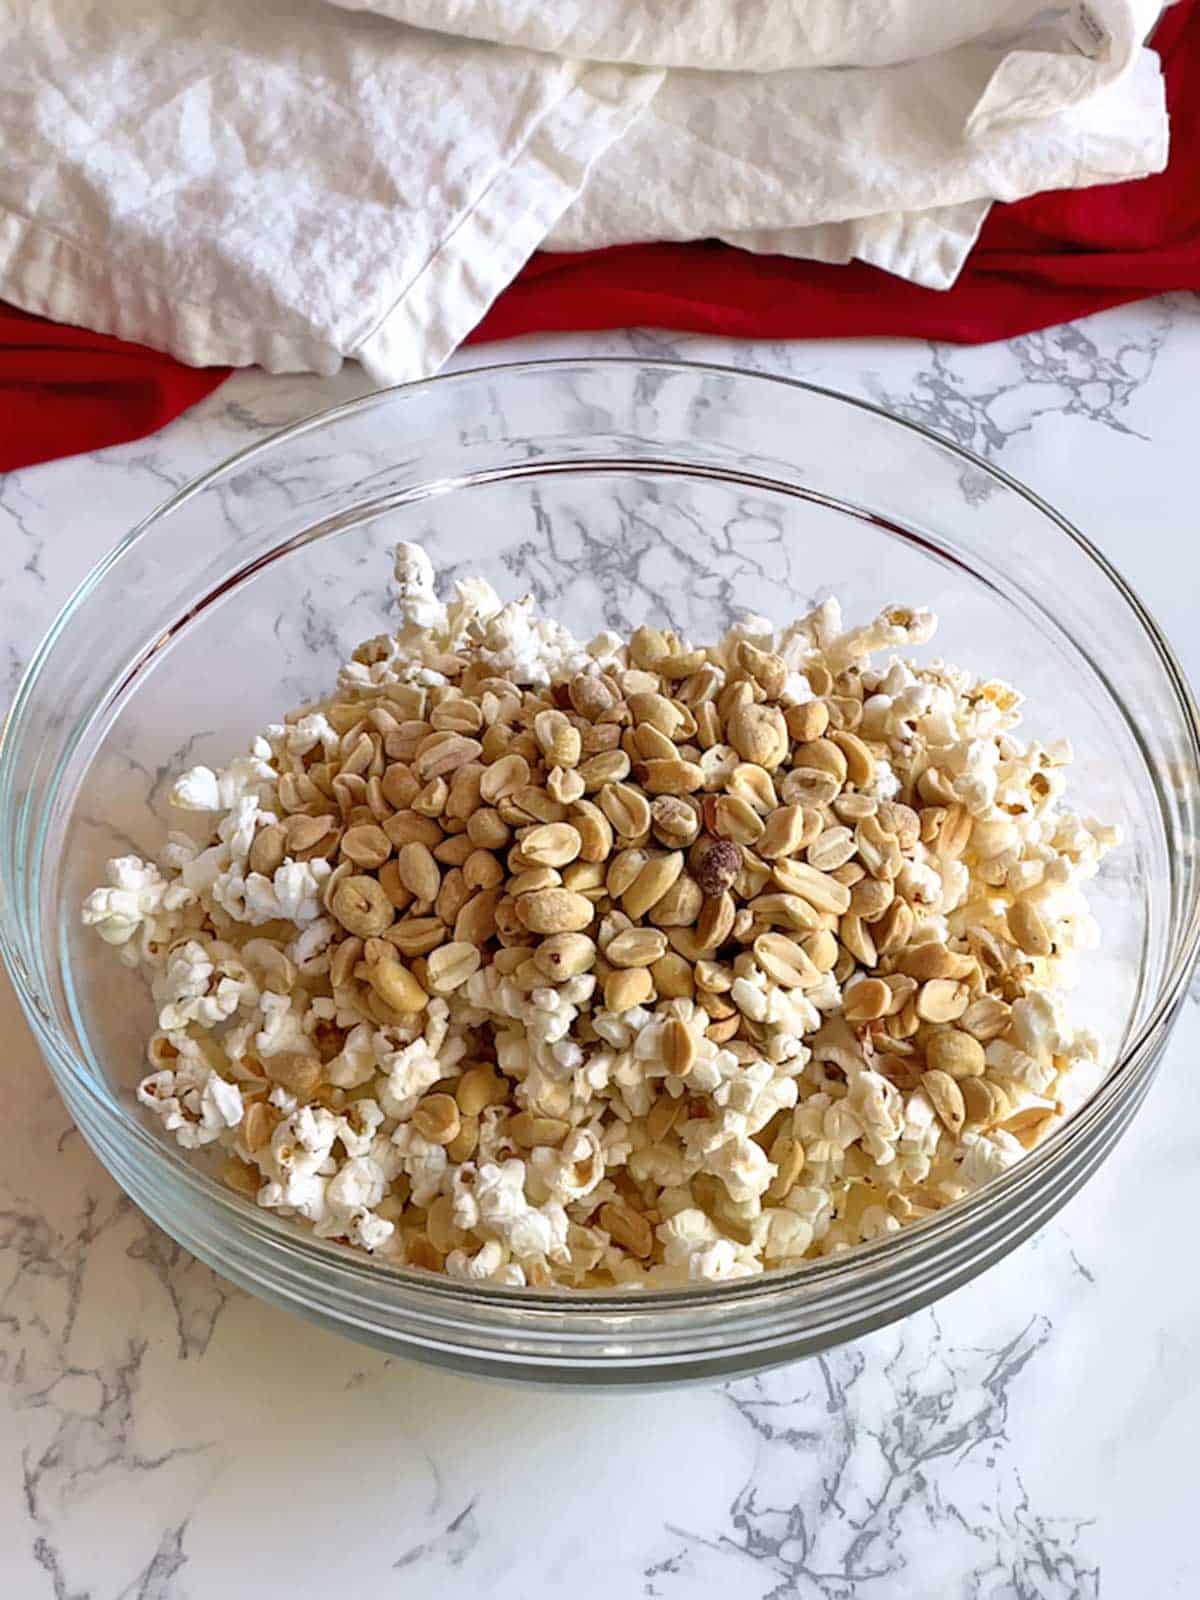 Popcorn and peanuts in large bowl.